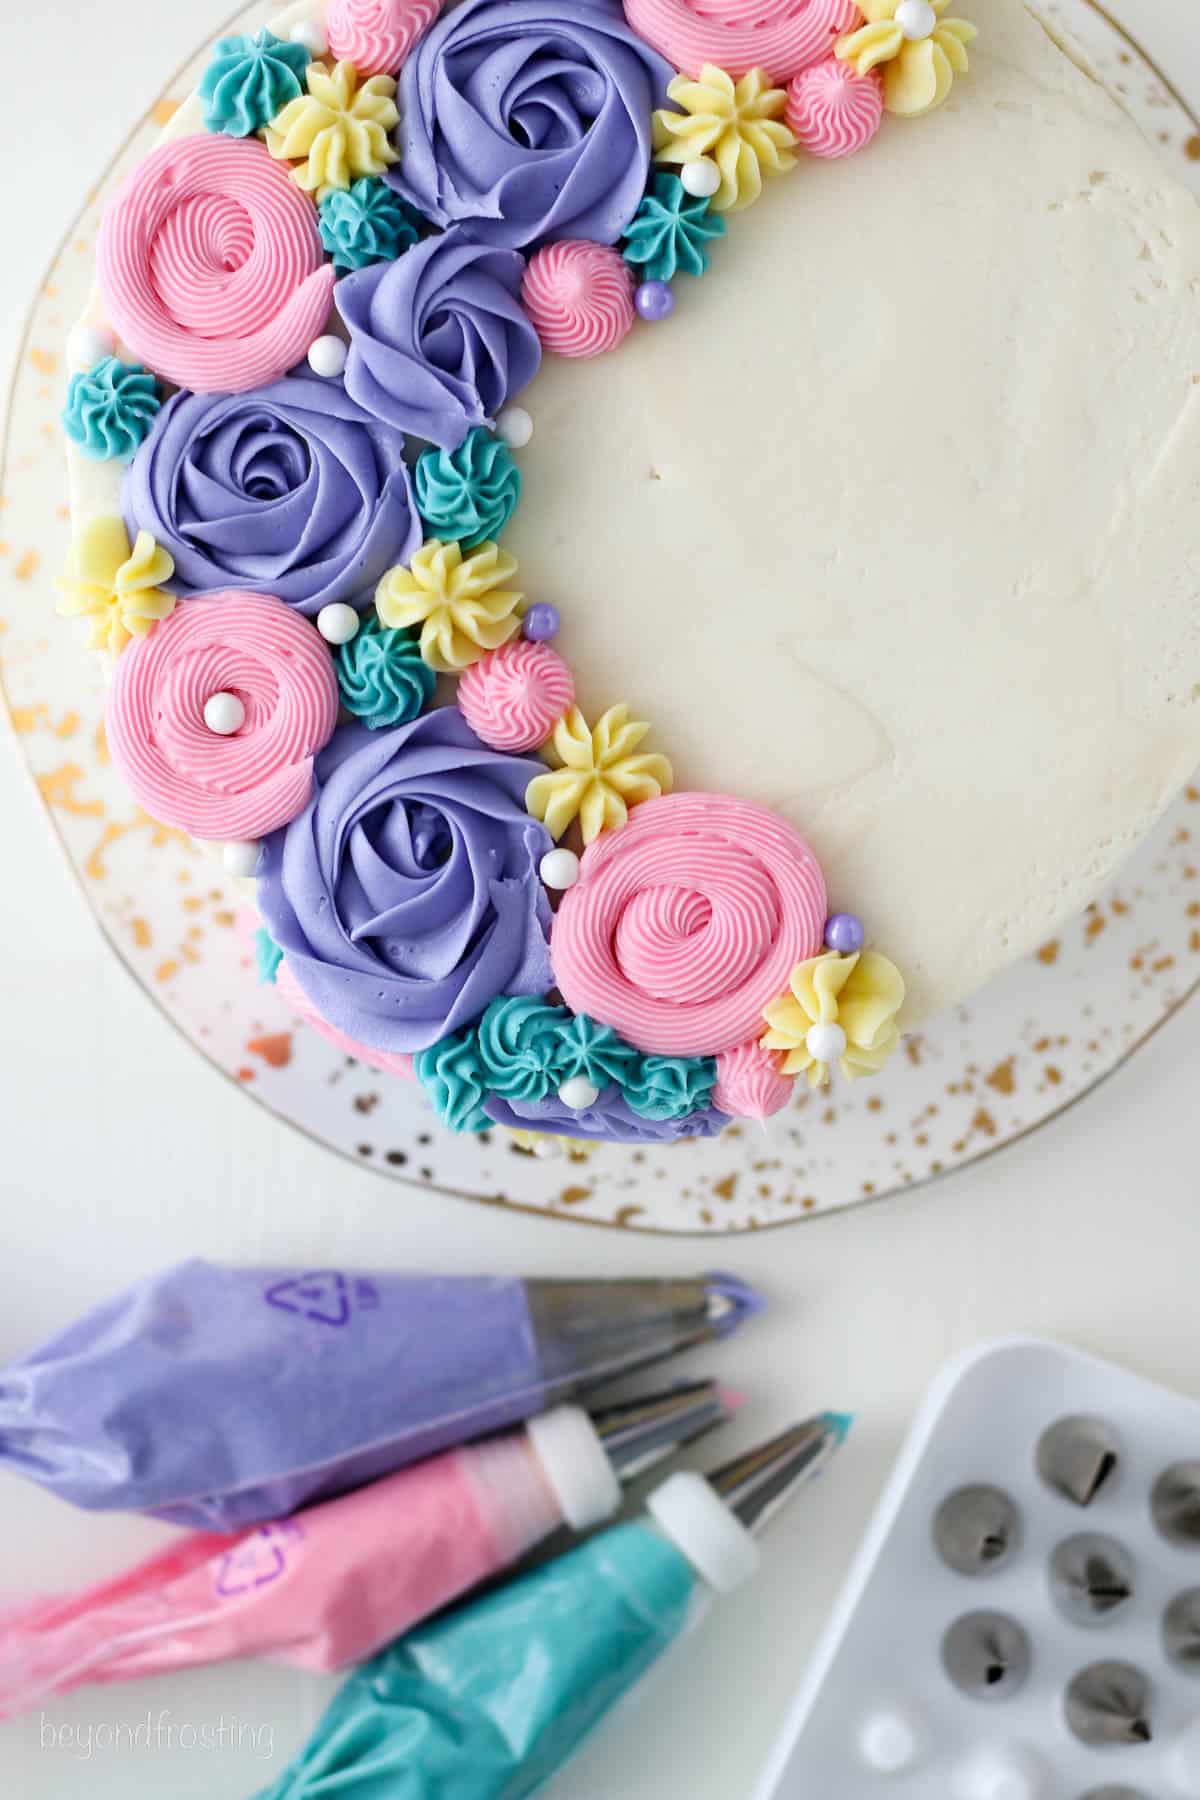 Overhead view of three piping bags with purple, pink, and light turquoise buttercream frosting next to a cake decorated with piped frosting flowers.